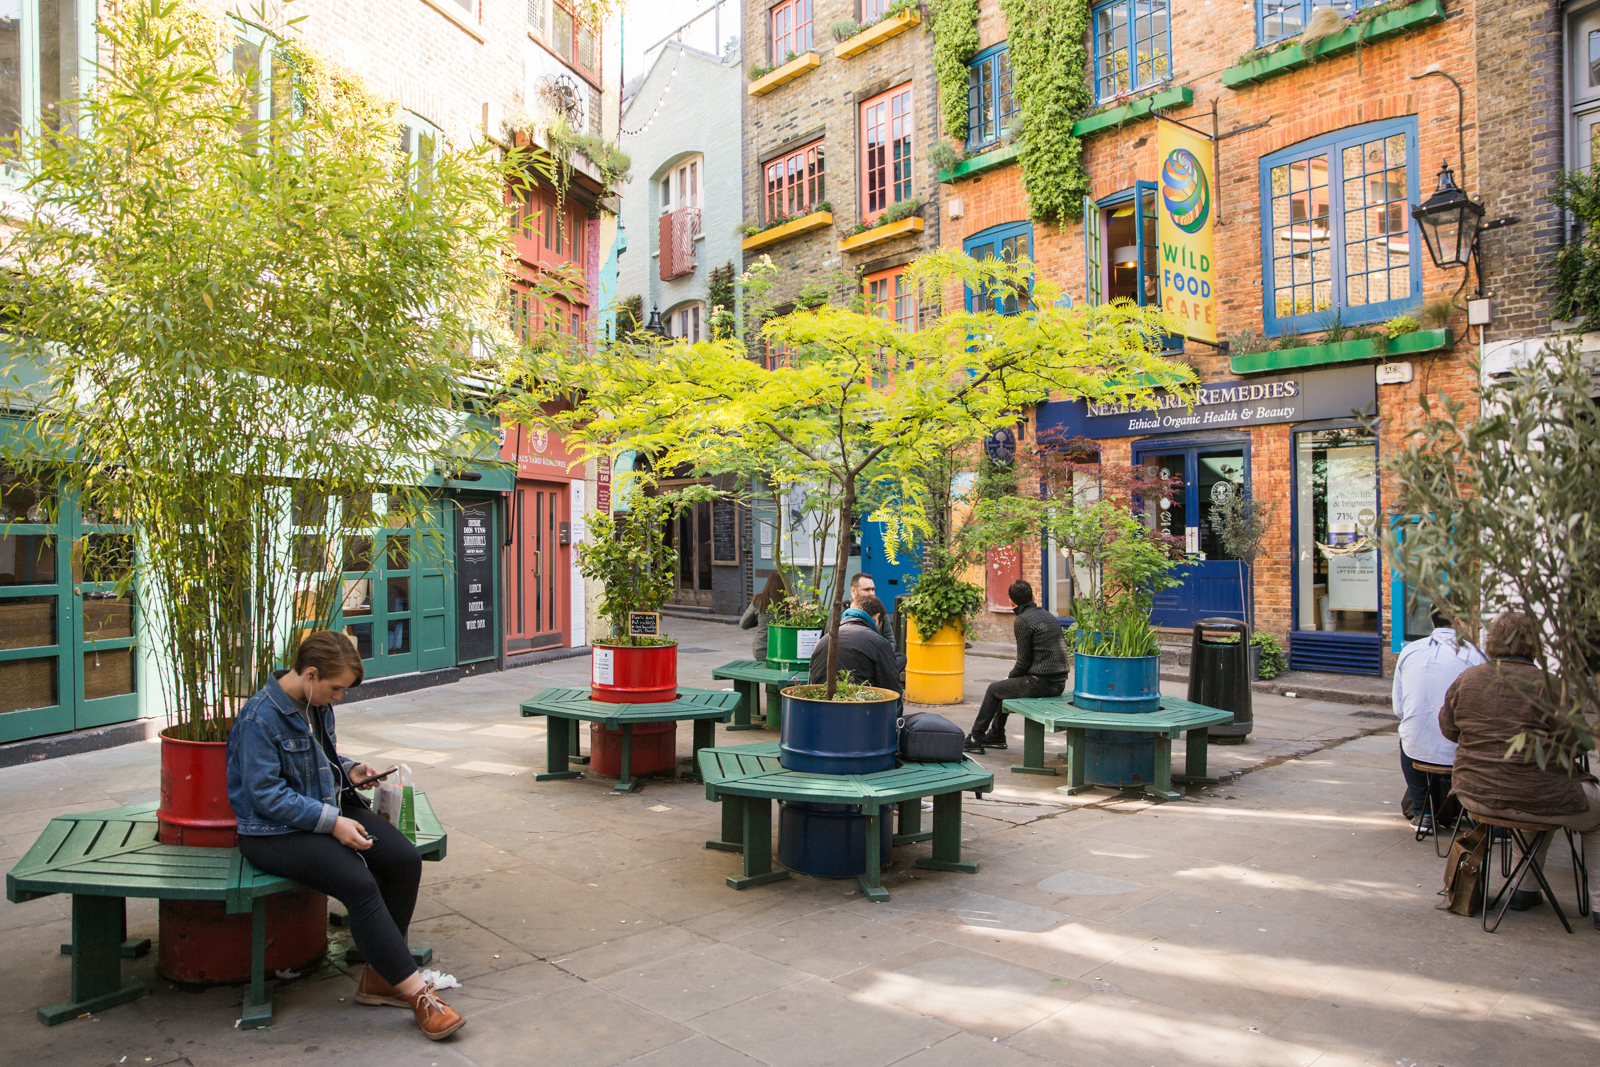 How To Spend 24 Hours In Covent Garden